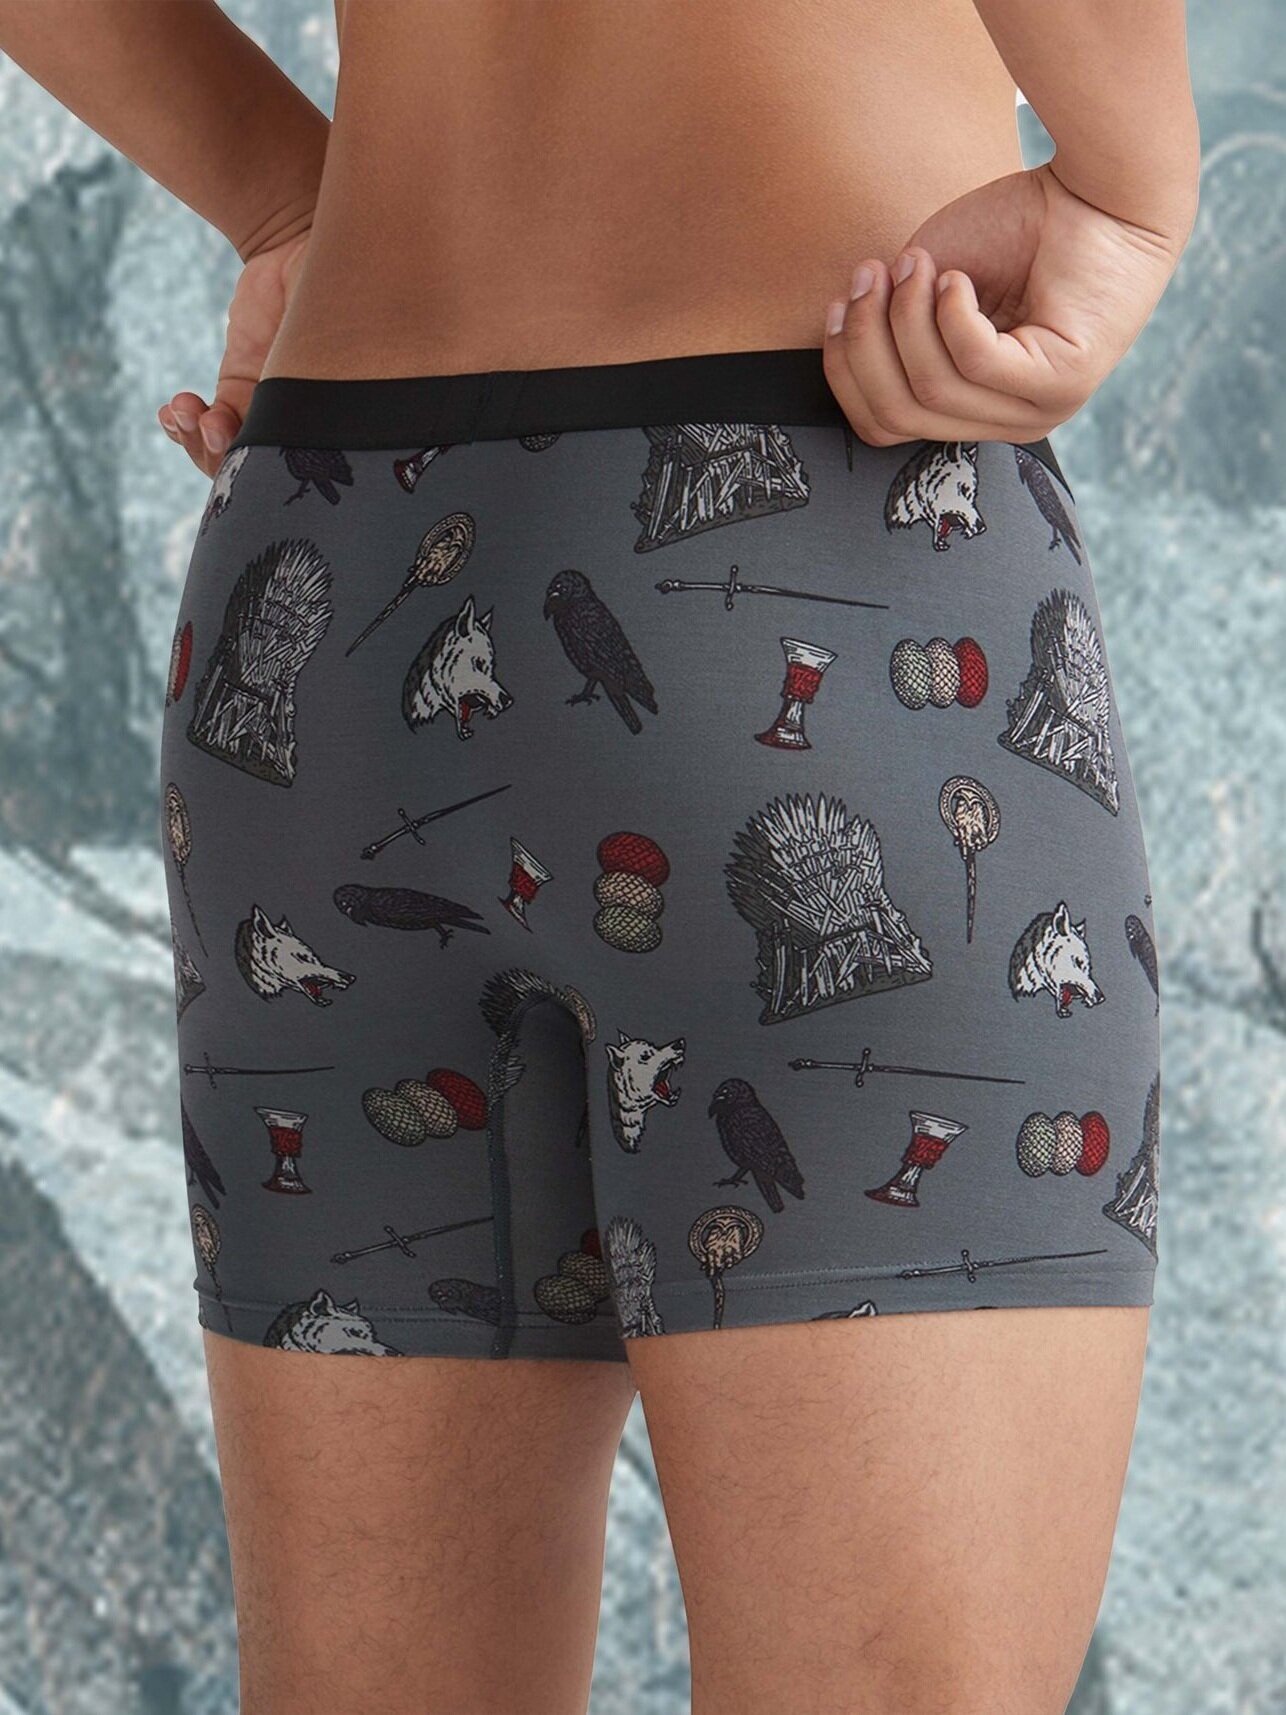 Game of Thrones Gifts and Apparel  MeUndies — Beyond Basics by MeUndies